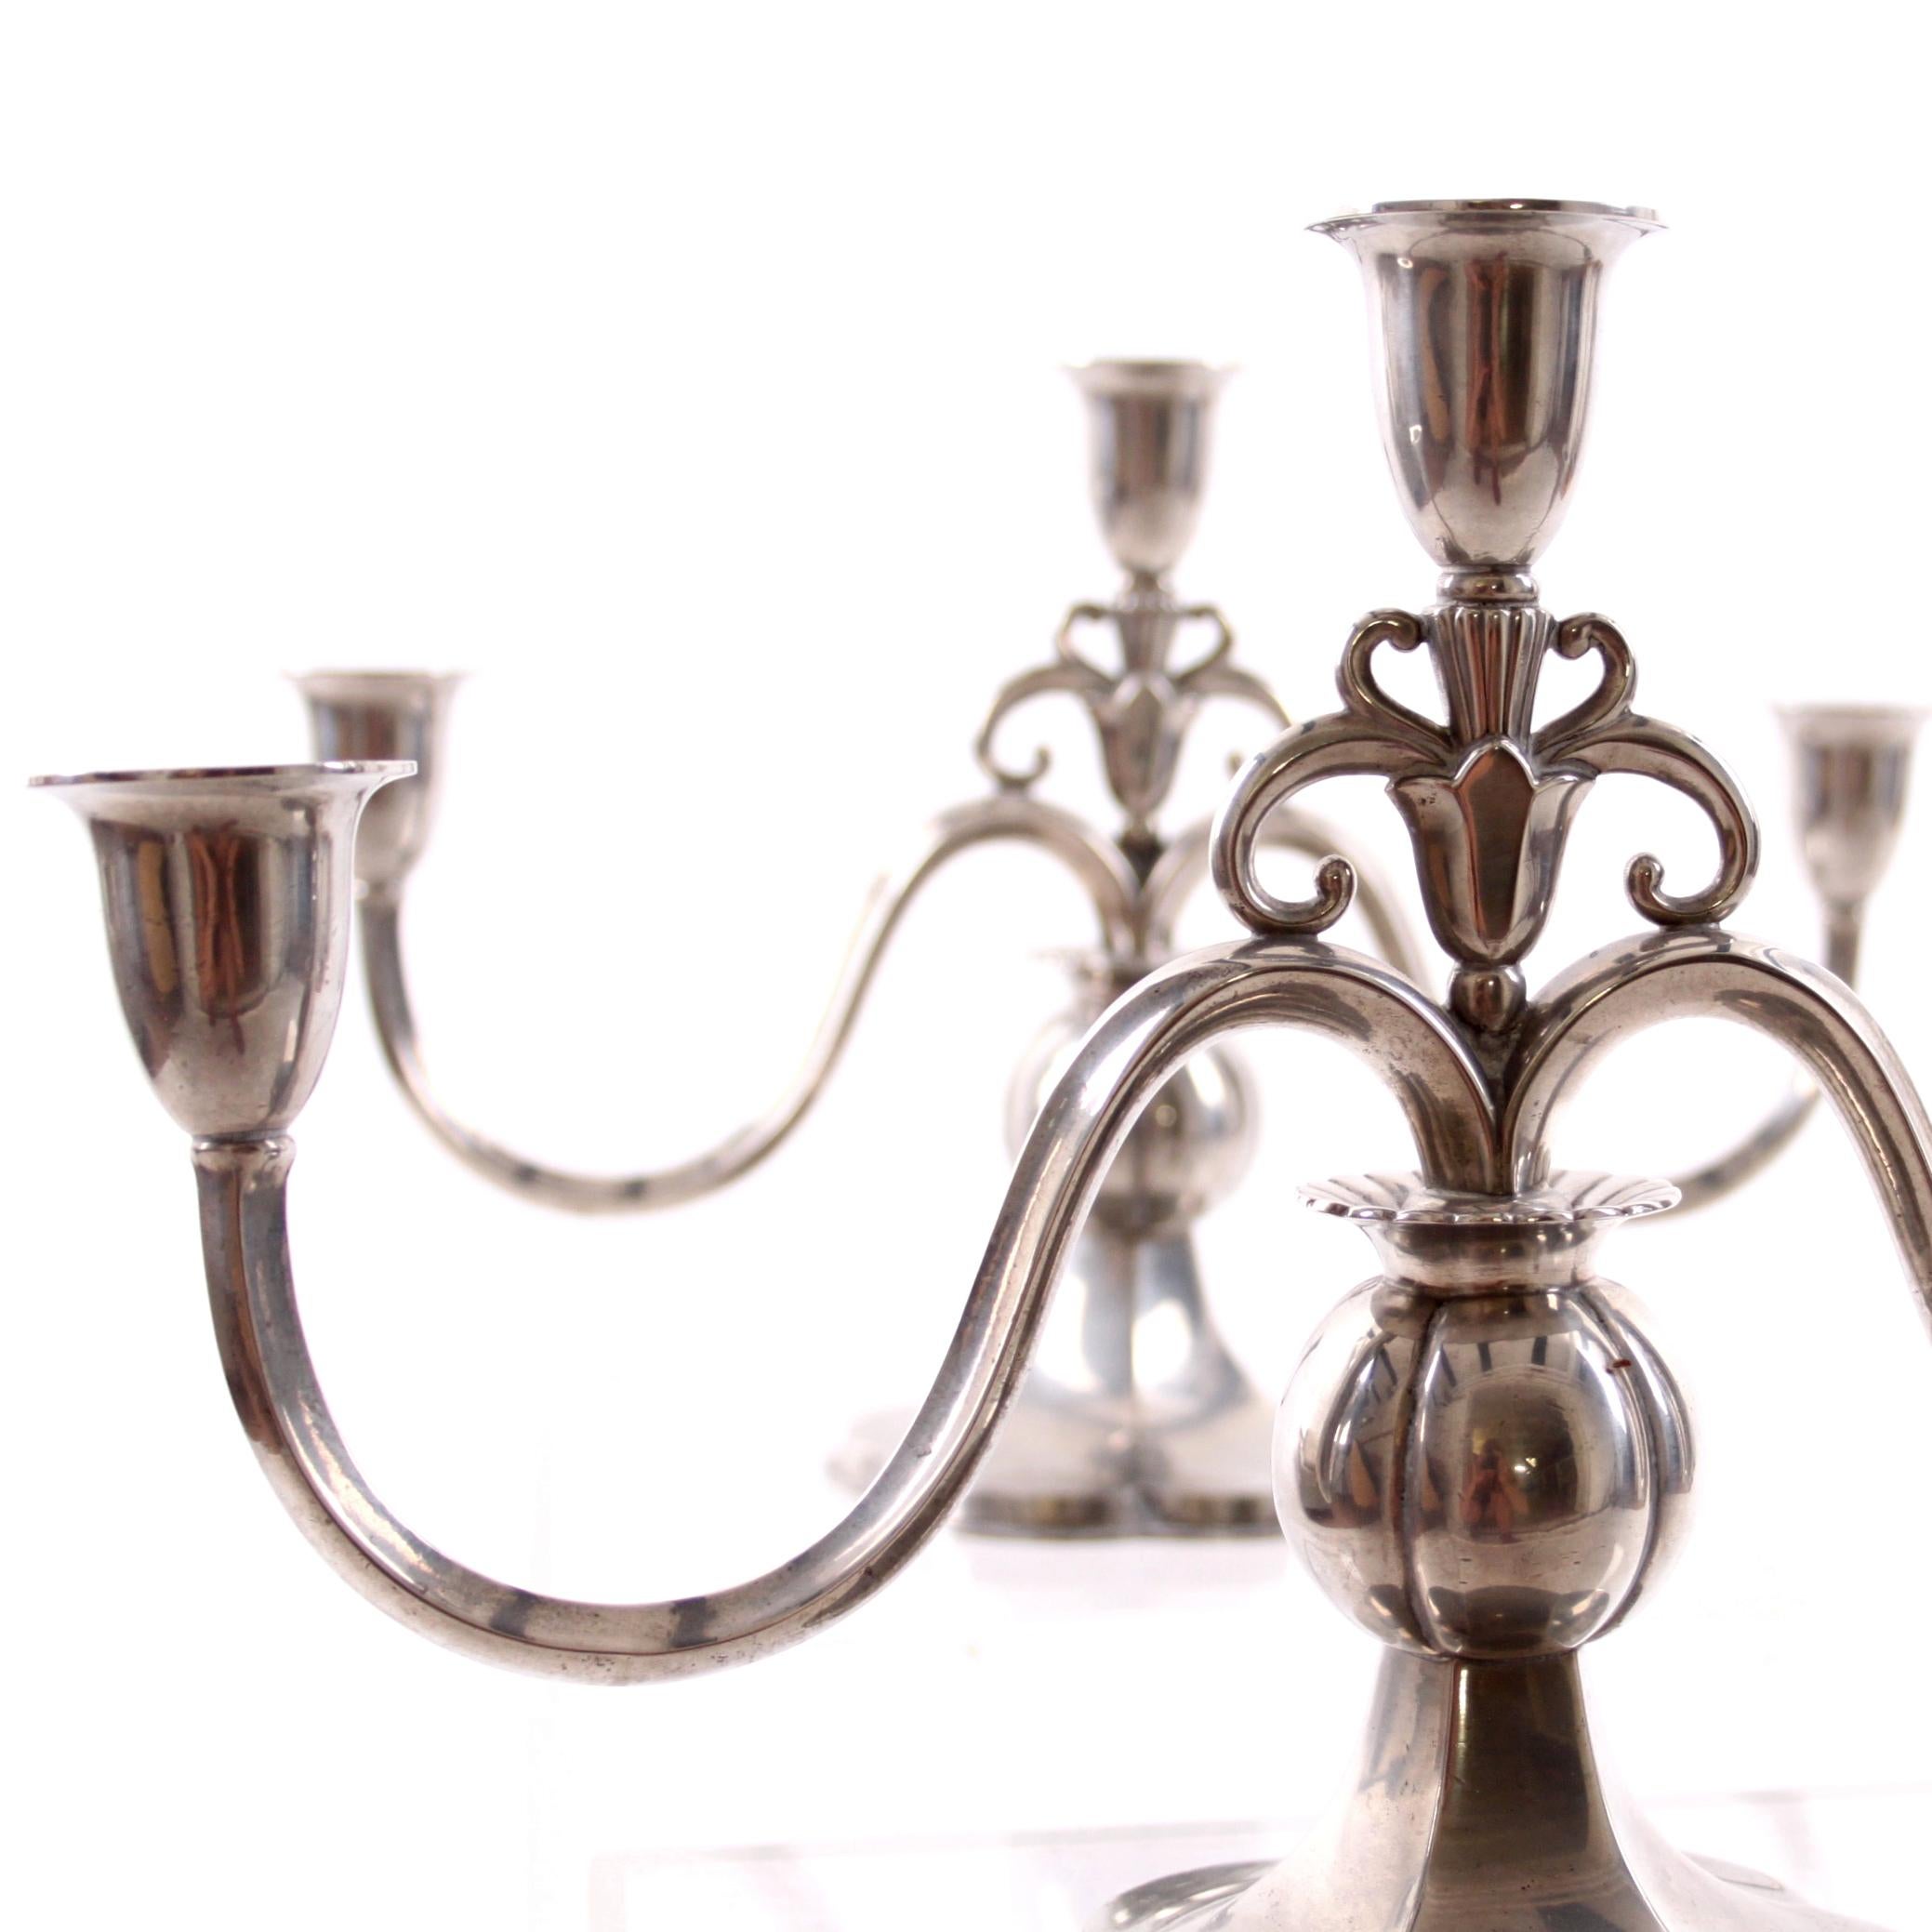 Rare Pair of Just Andersen Three Armed Candelabras, Pewter, Denmark 1930s For Sale 1